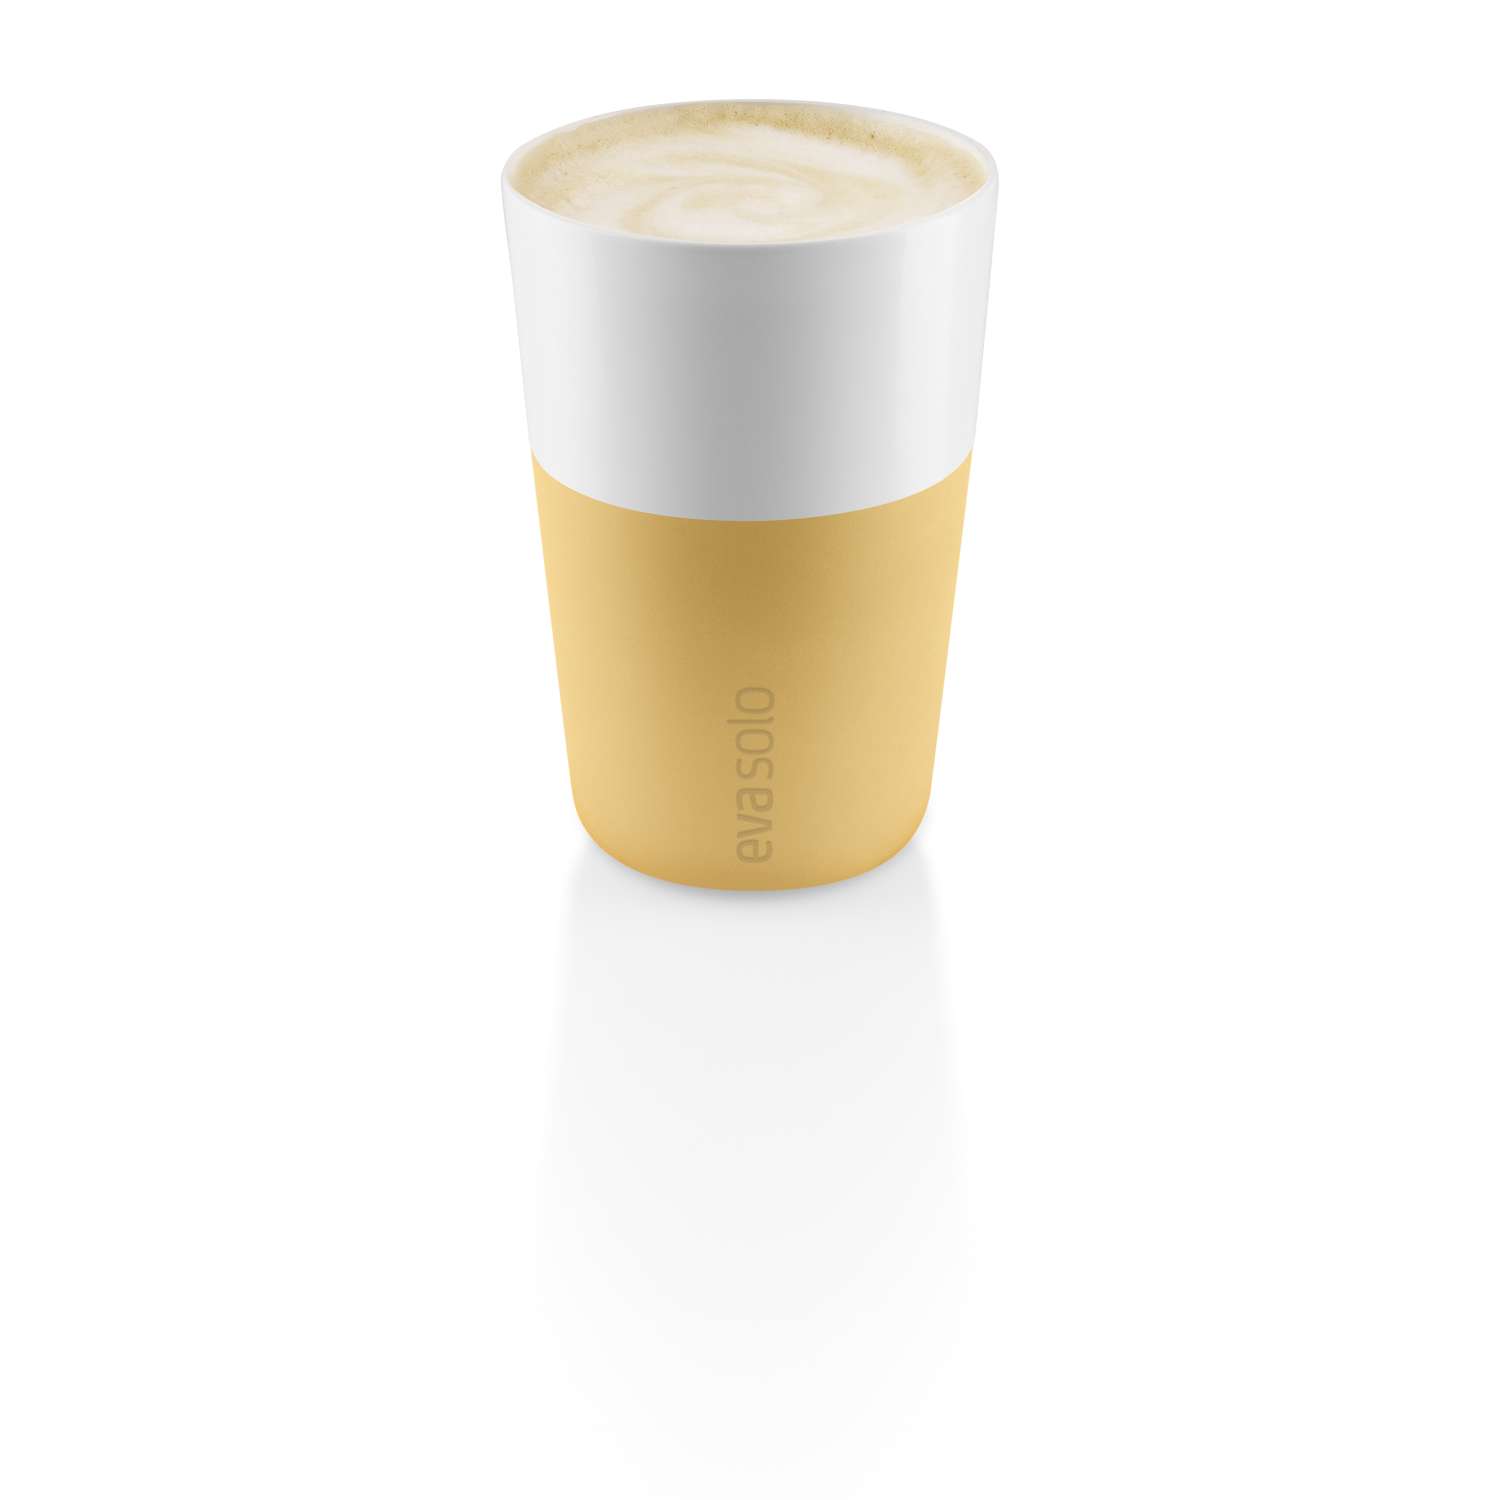 https://www.evasolo.com/%2FFiles%2FImages%2FPlytix%2FProduct_Photo_2%2F501125_Cafe_latte_tumblers_full_A_Golden_Sand_aRGB_High.jpg